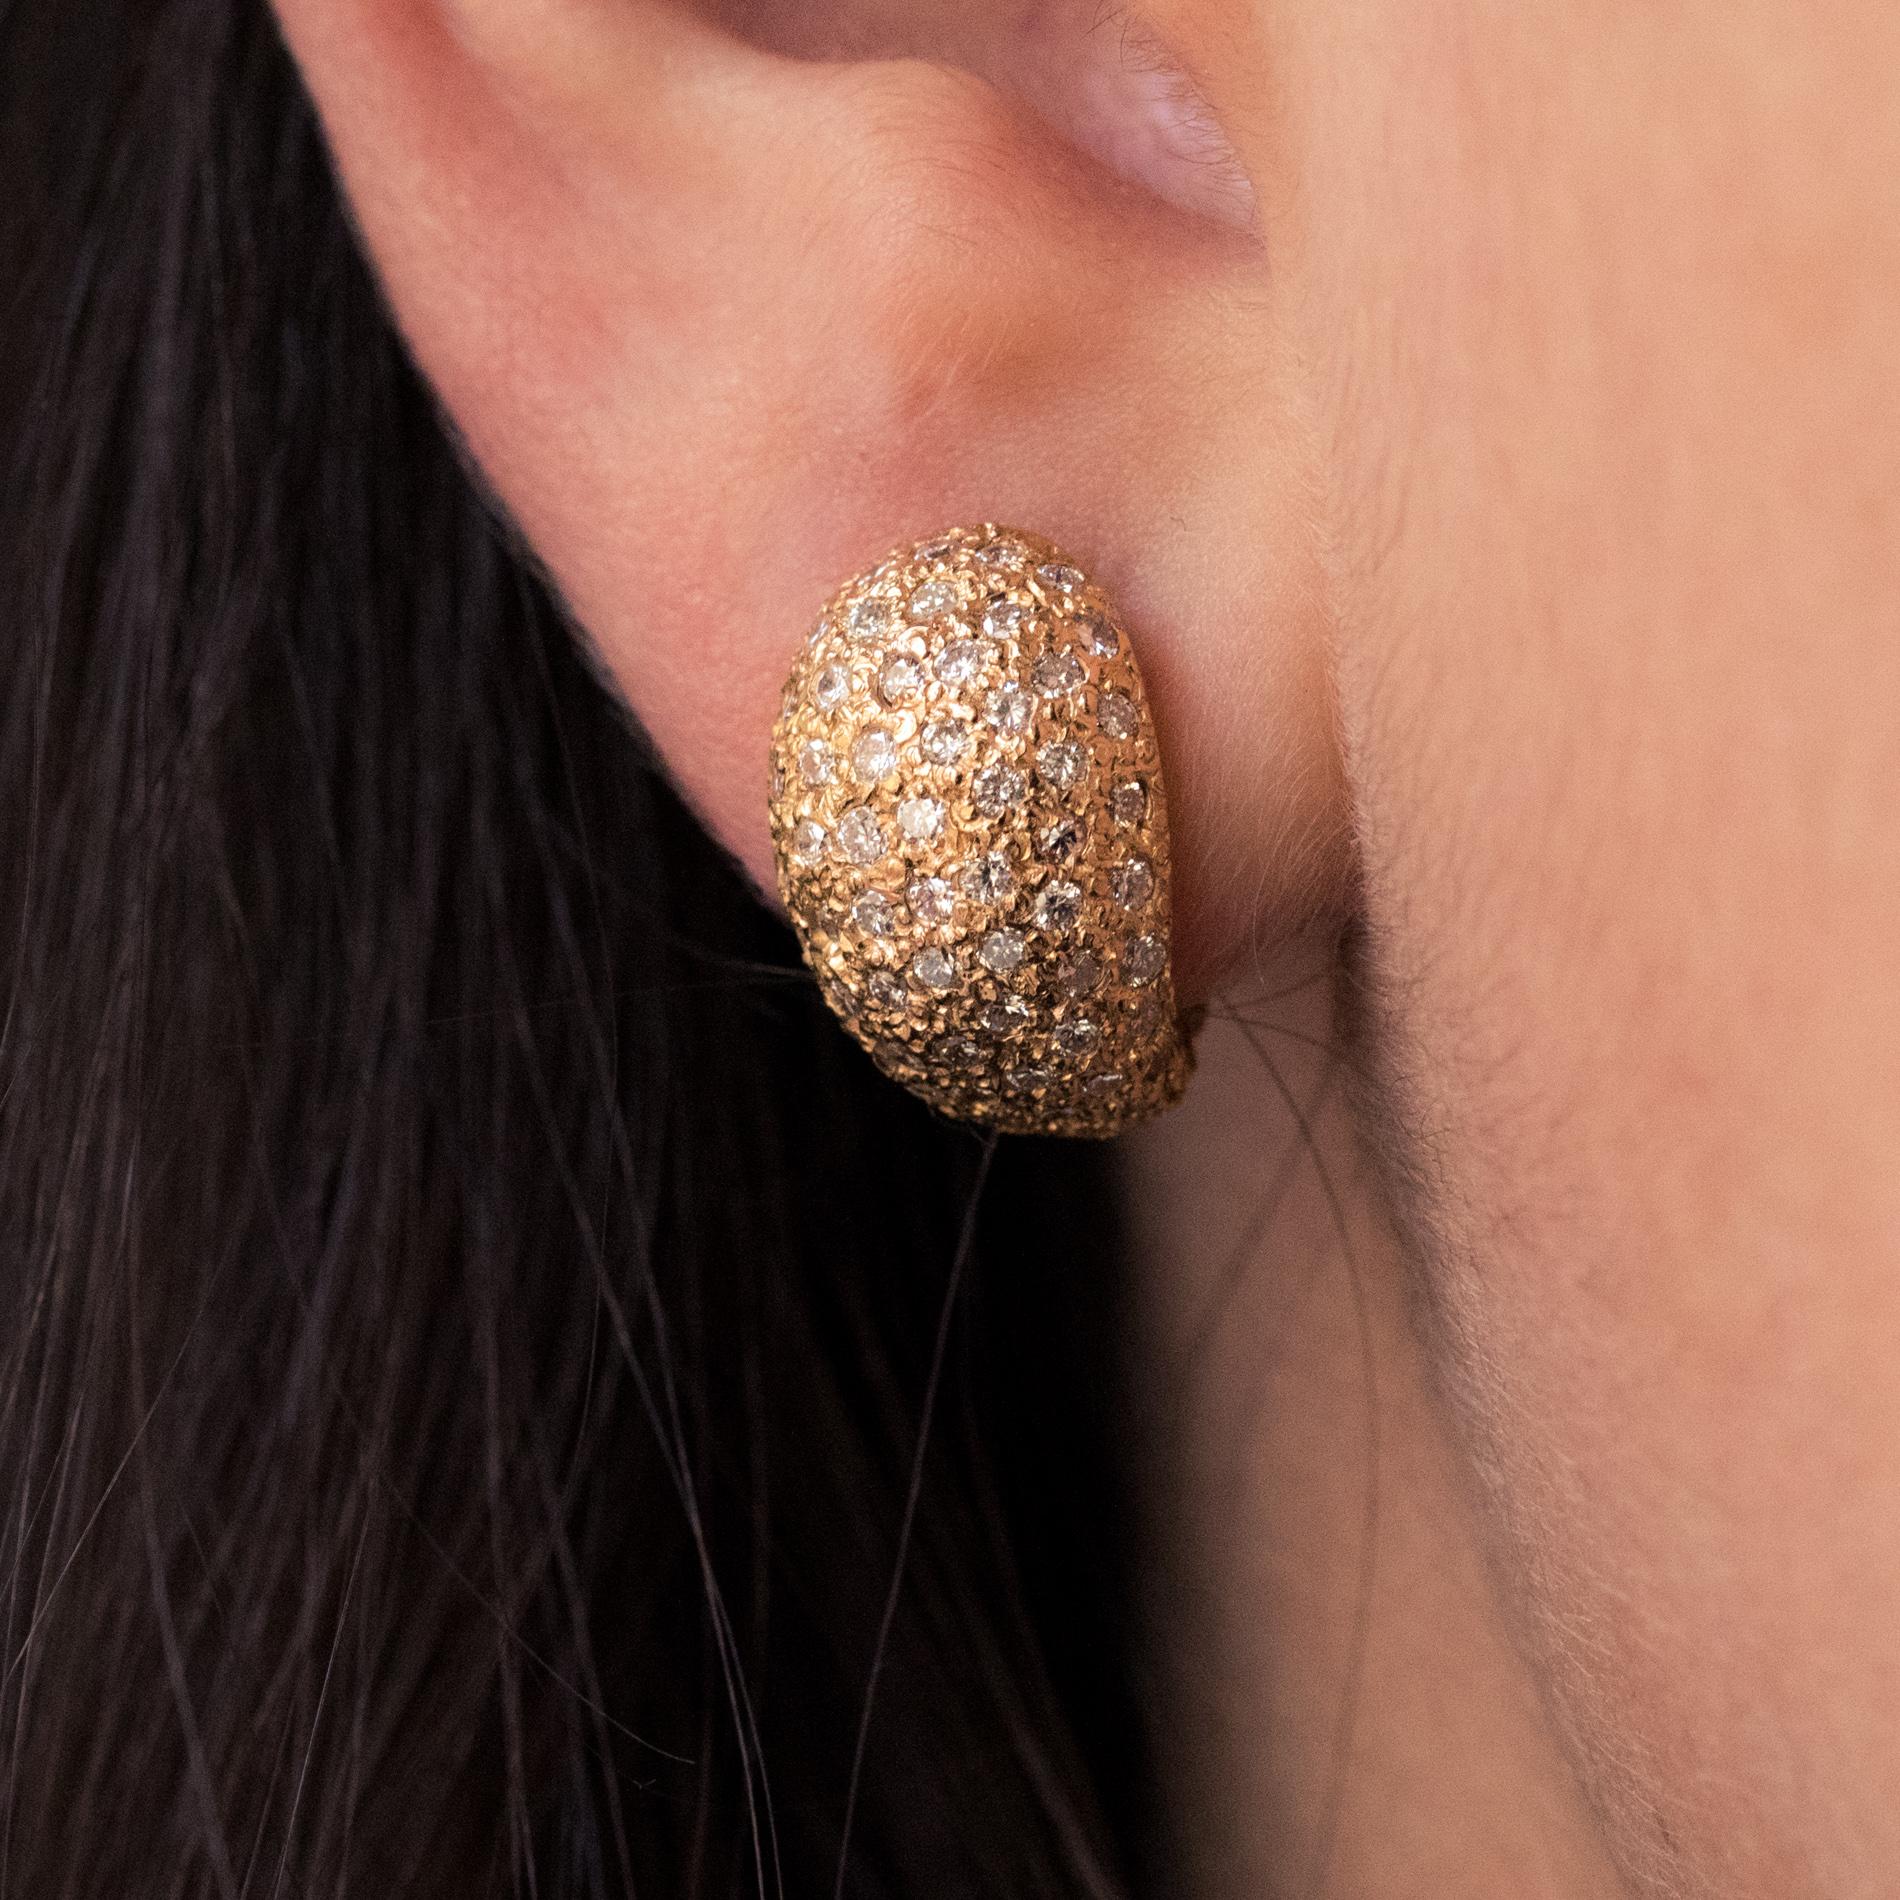 For pierced ears.
Earrings in 18 karat rose gold, eagle's head hallmark.
Curved on the front, each of these earrings is paved with diamonds. The fastening system is a peak with security.
Height: 14.8mm, width: 10.3mm, thickness: approximately